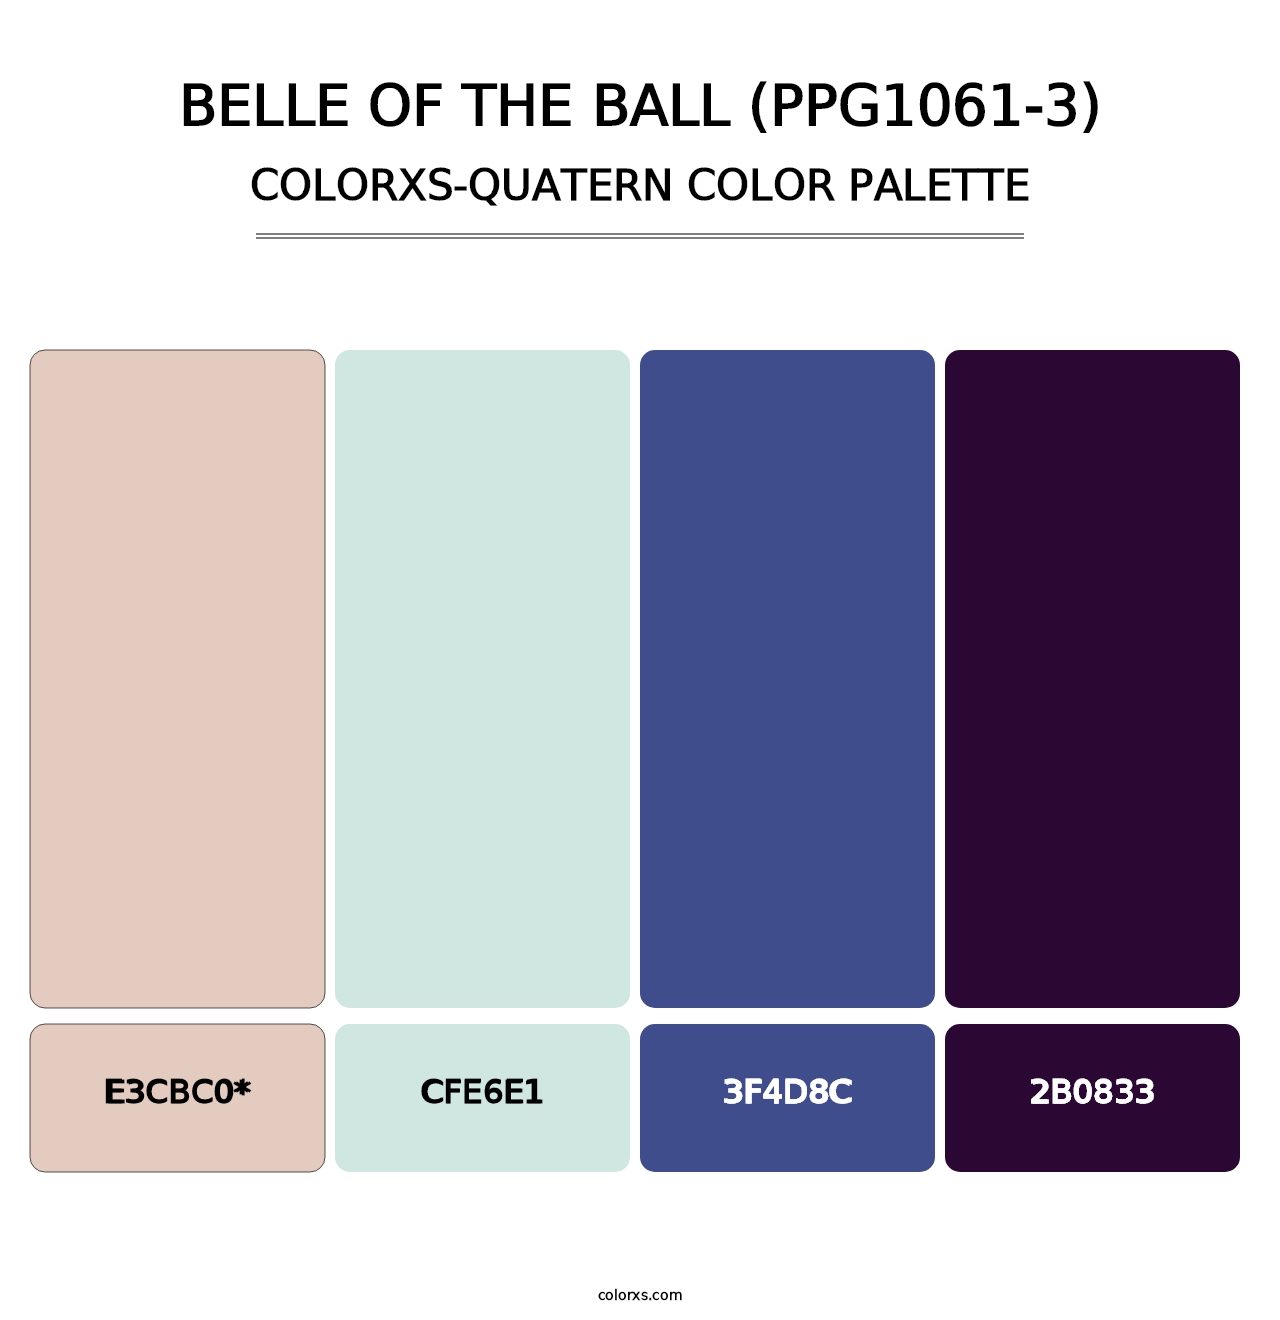 Belle Of The Ball (PPG1061-3) - Colorxs Quatern Palette